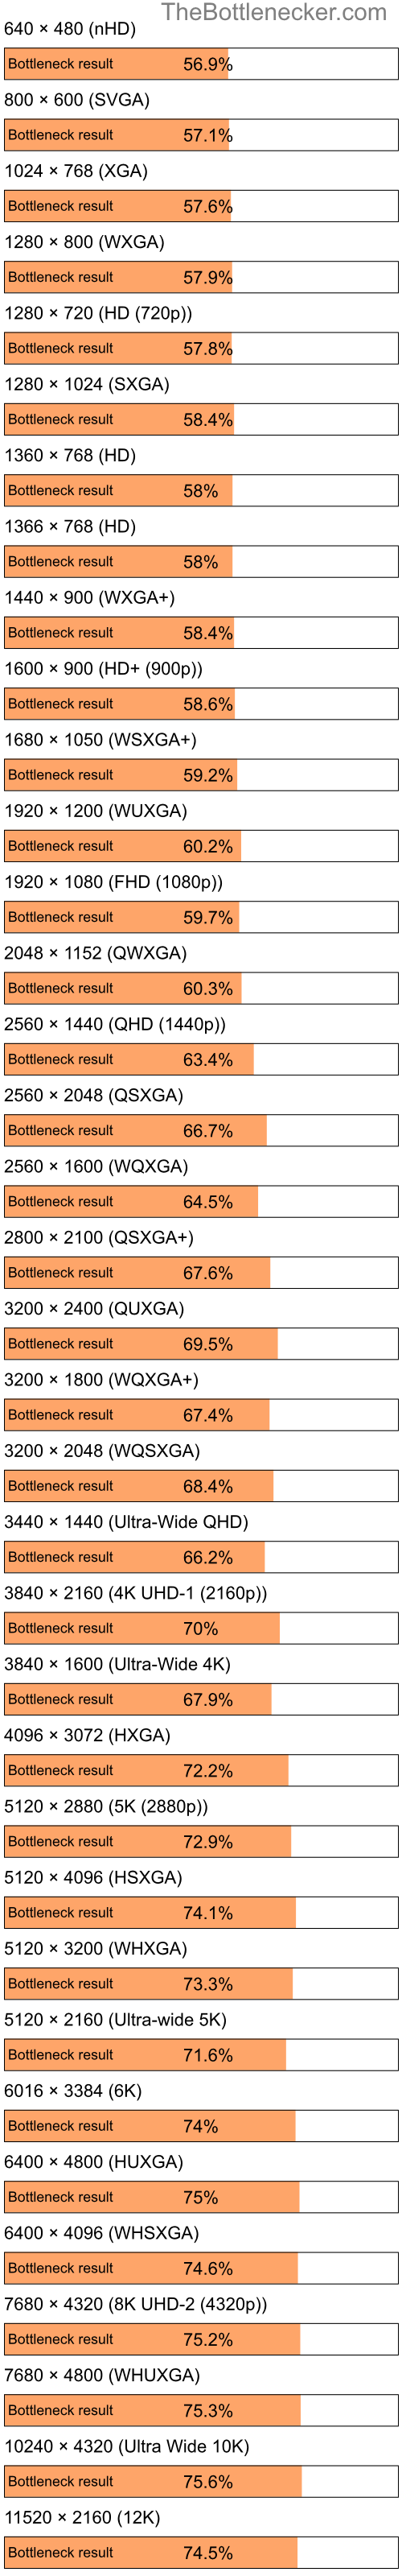 Bottleneck results by resolution for Intel Atom N280 and AMD Mobility Radeon HD 3450 in Processor Intense Tasks